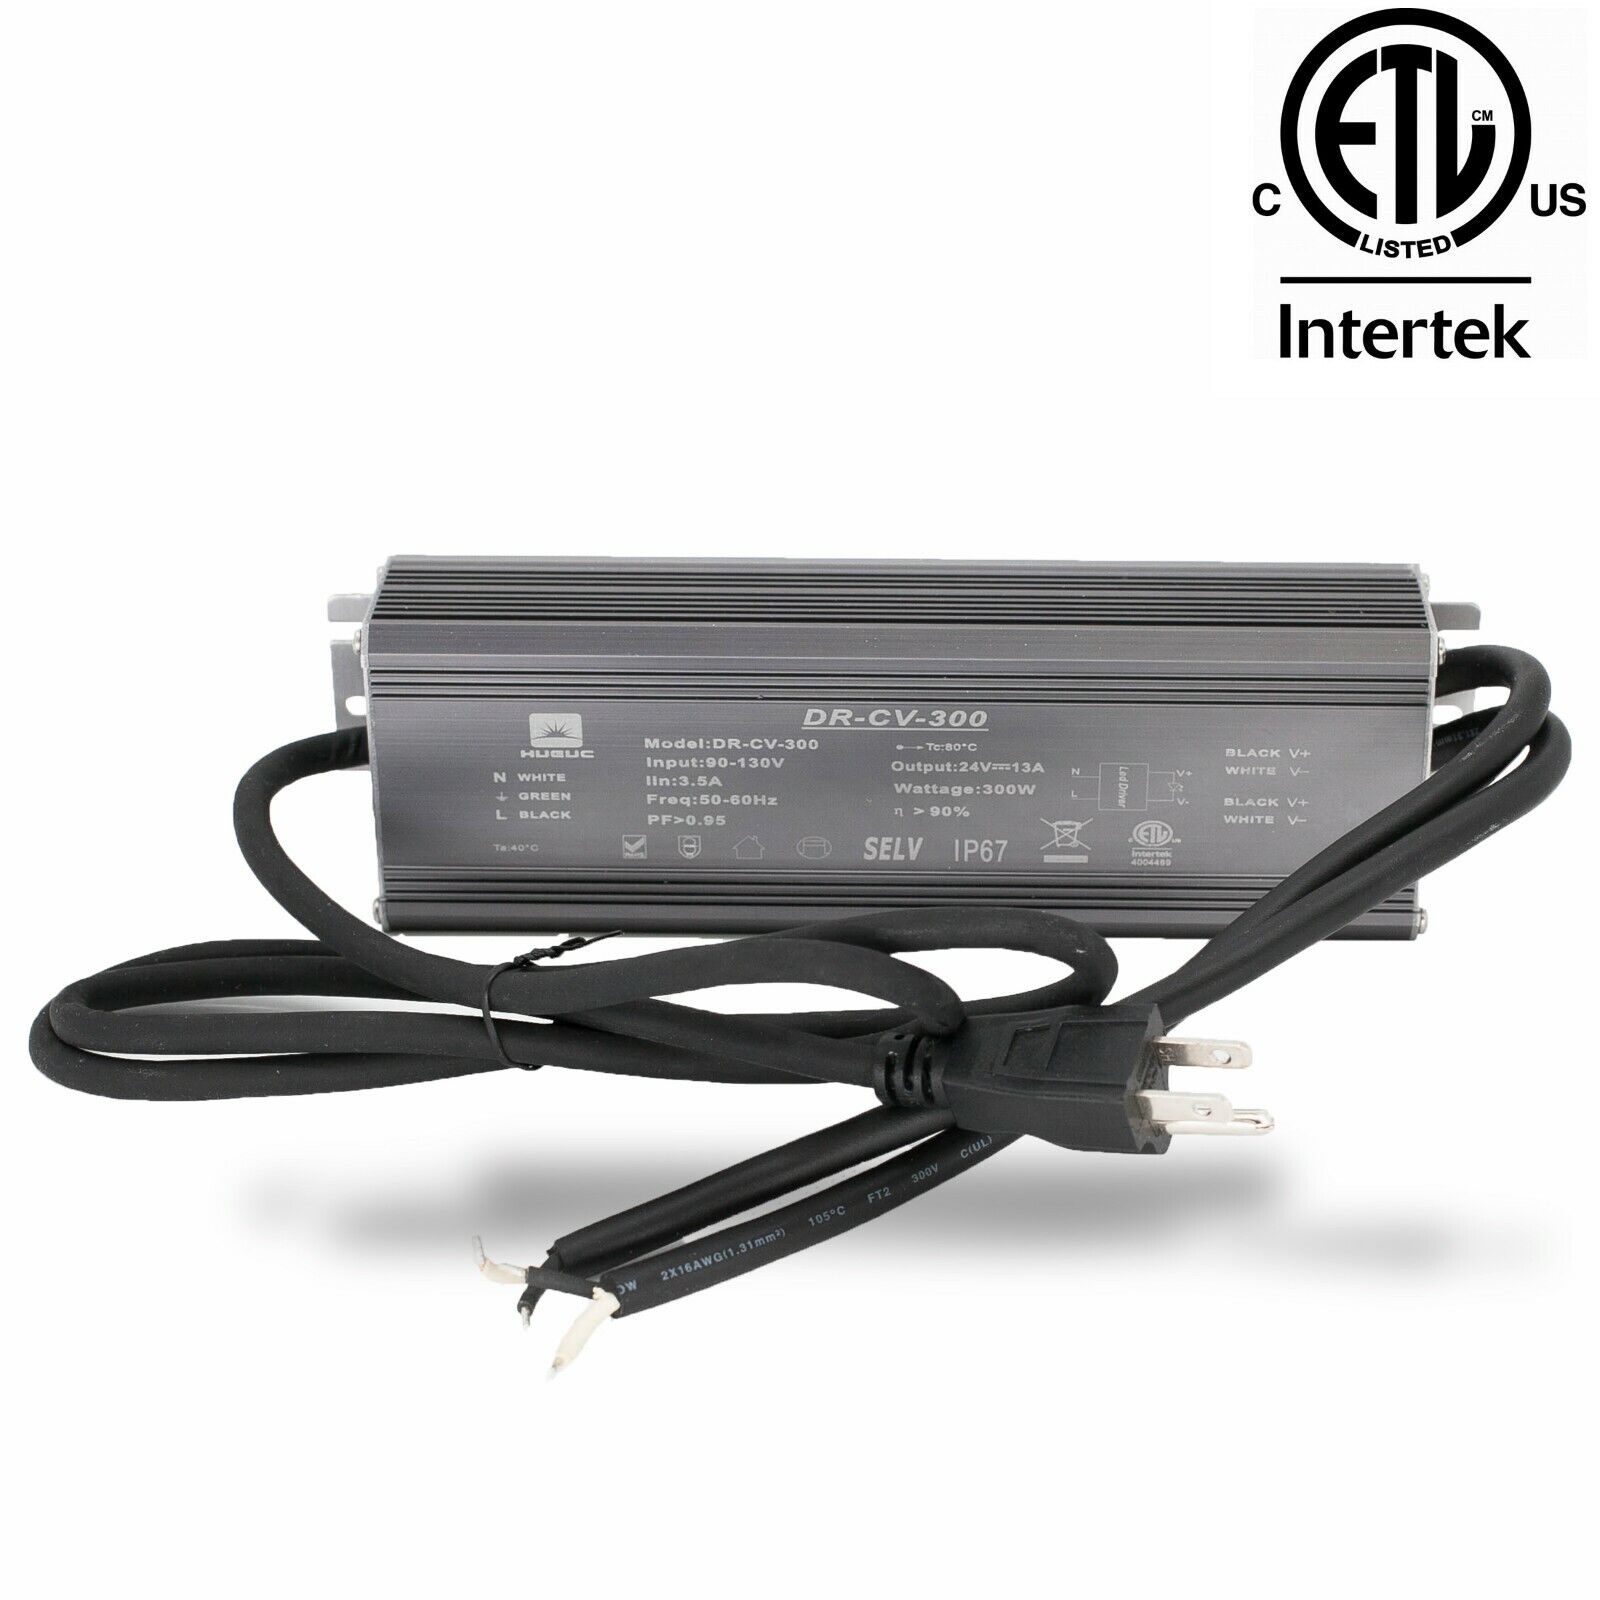 ETL LISTED 24v 12.5A 300w LED Light Power Supply Driver Waterproof + AC Plug Connectors: AC plug and output dual wire